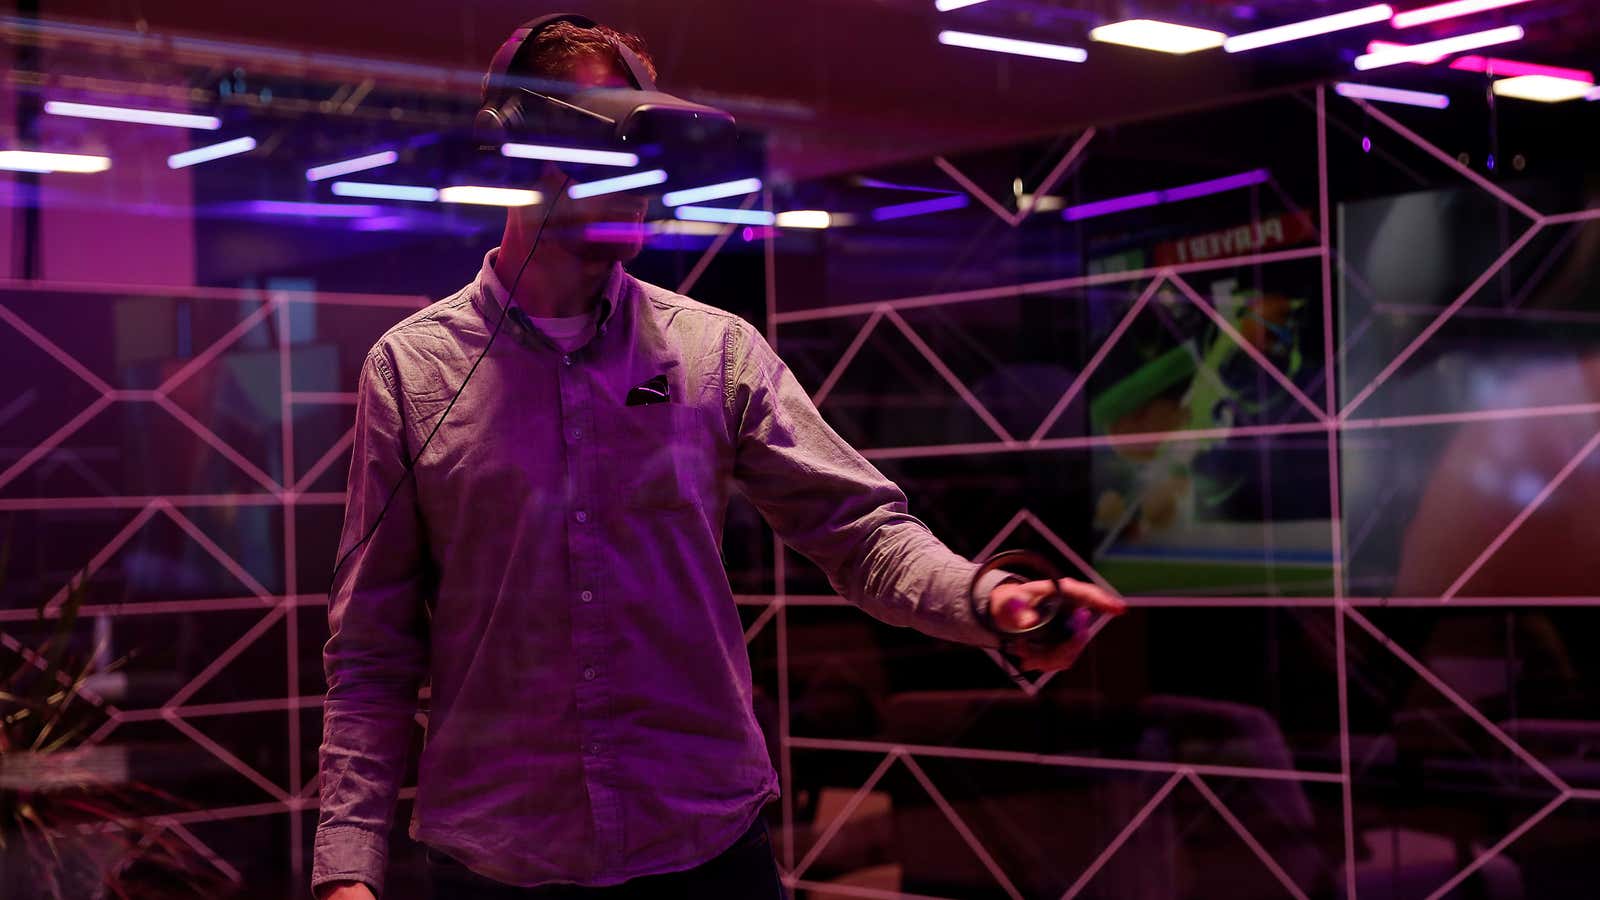 A conference-goer tests the original Oculus Quest headset in 2019.